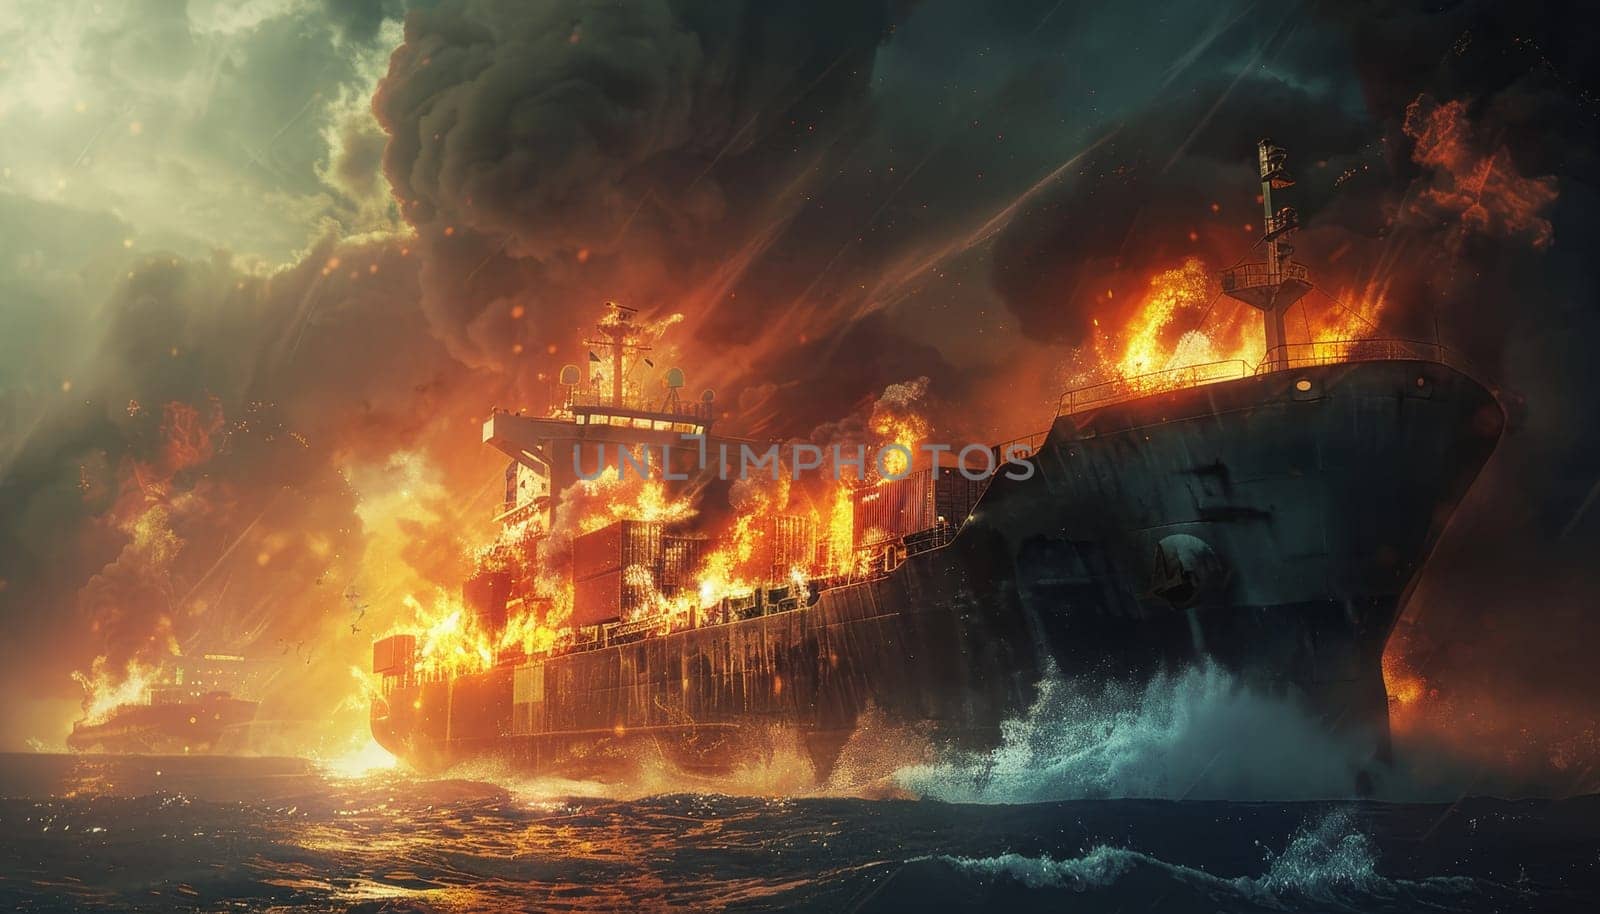 A ship is on fire in the ocean by AI generated image.